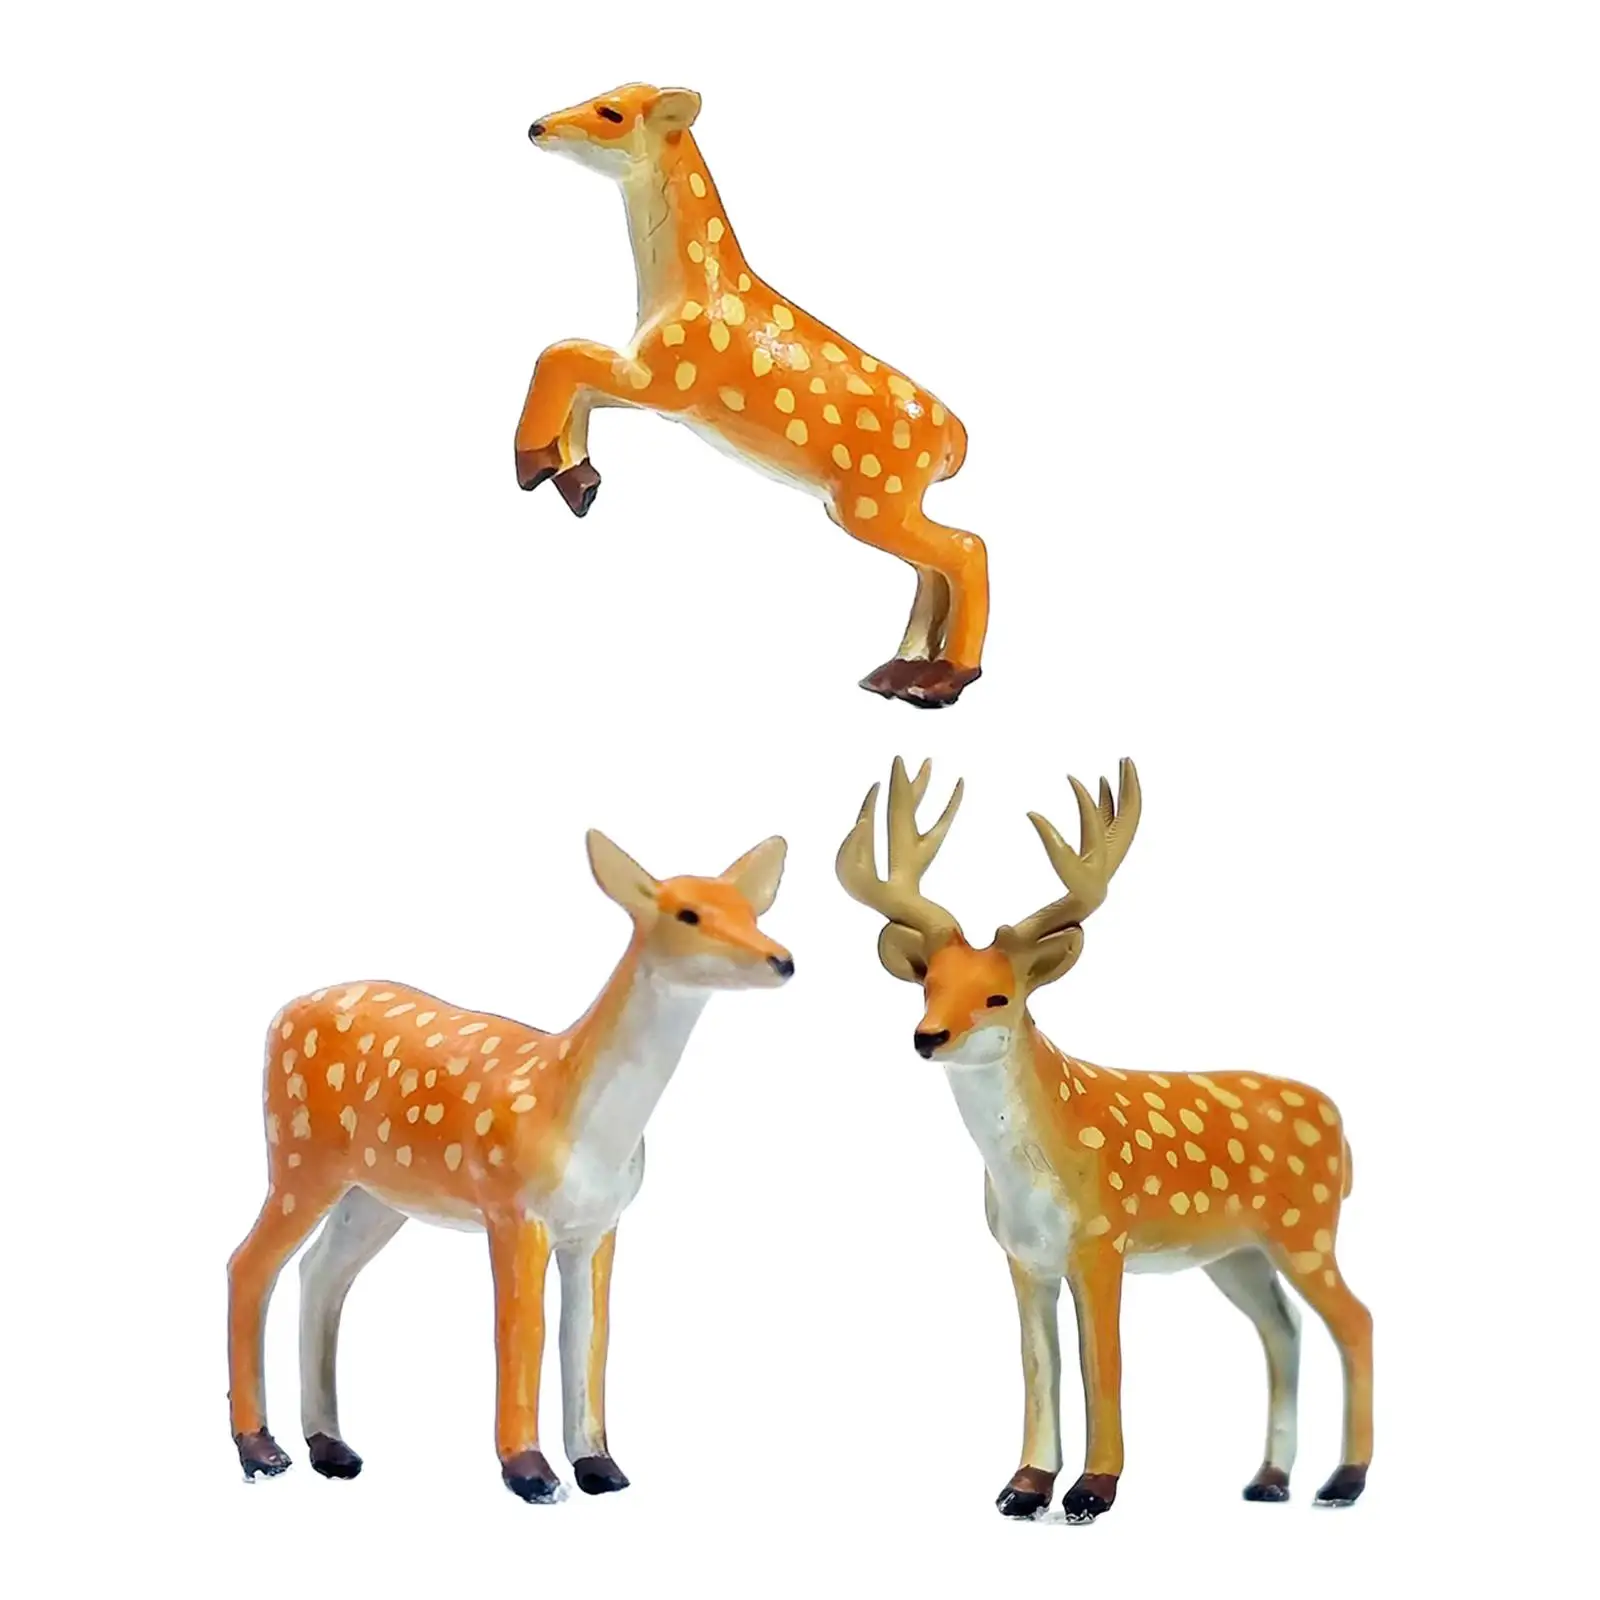 3Pcs 1:64 Forest Animal Deer Figures Resin for Diorama Layout Projects Decor